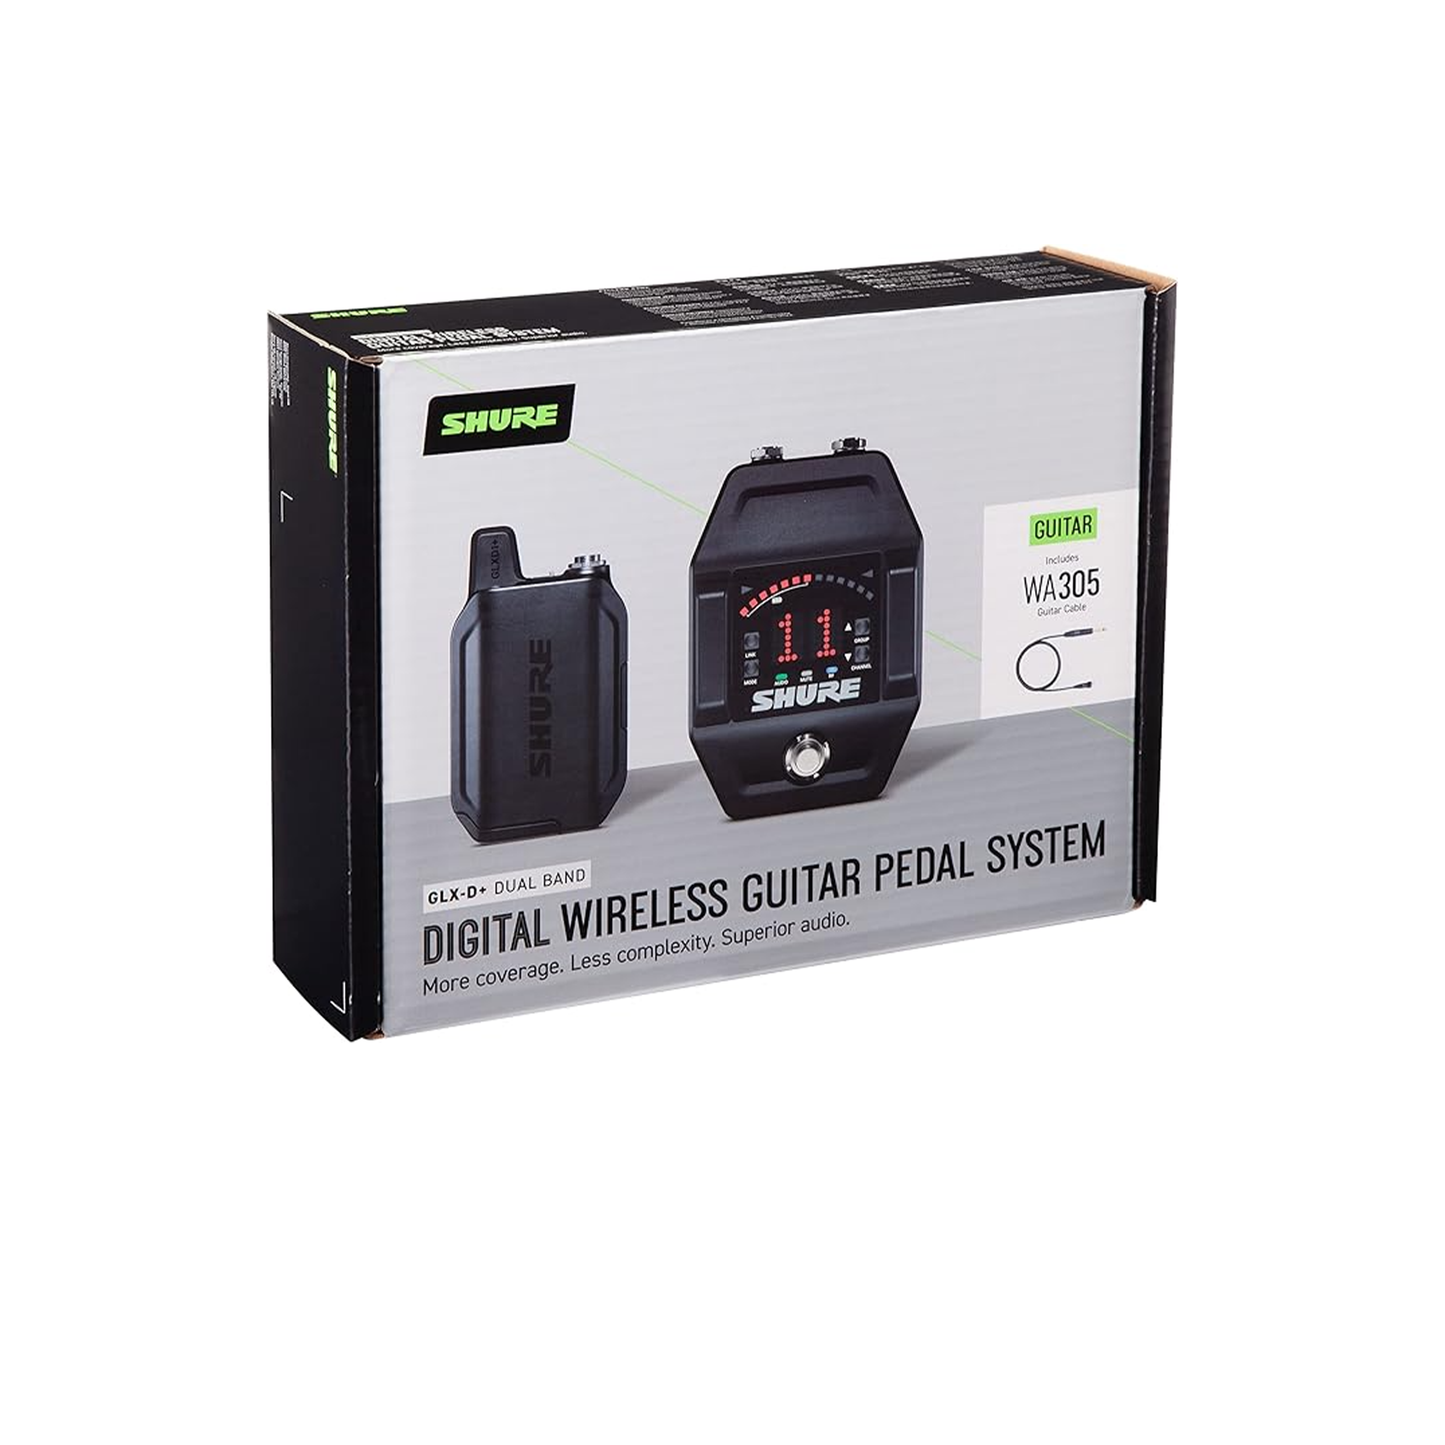 Shure GLXD16+ Dual Band Pro Digital Wireless System - Perfect for Guitar and Bass - 12-Hour Battery Life, 100 ft Range | Includes WA305 Premium Guitar Cable with 1/4" Jack & Guitar Pedal Receiver